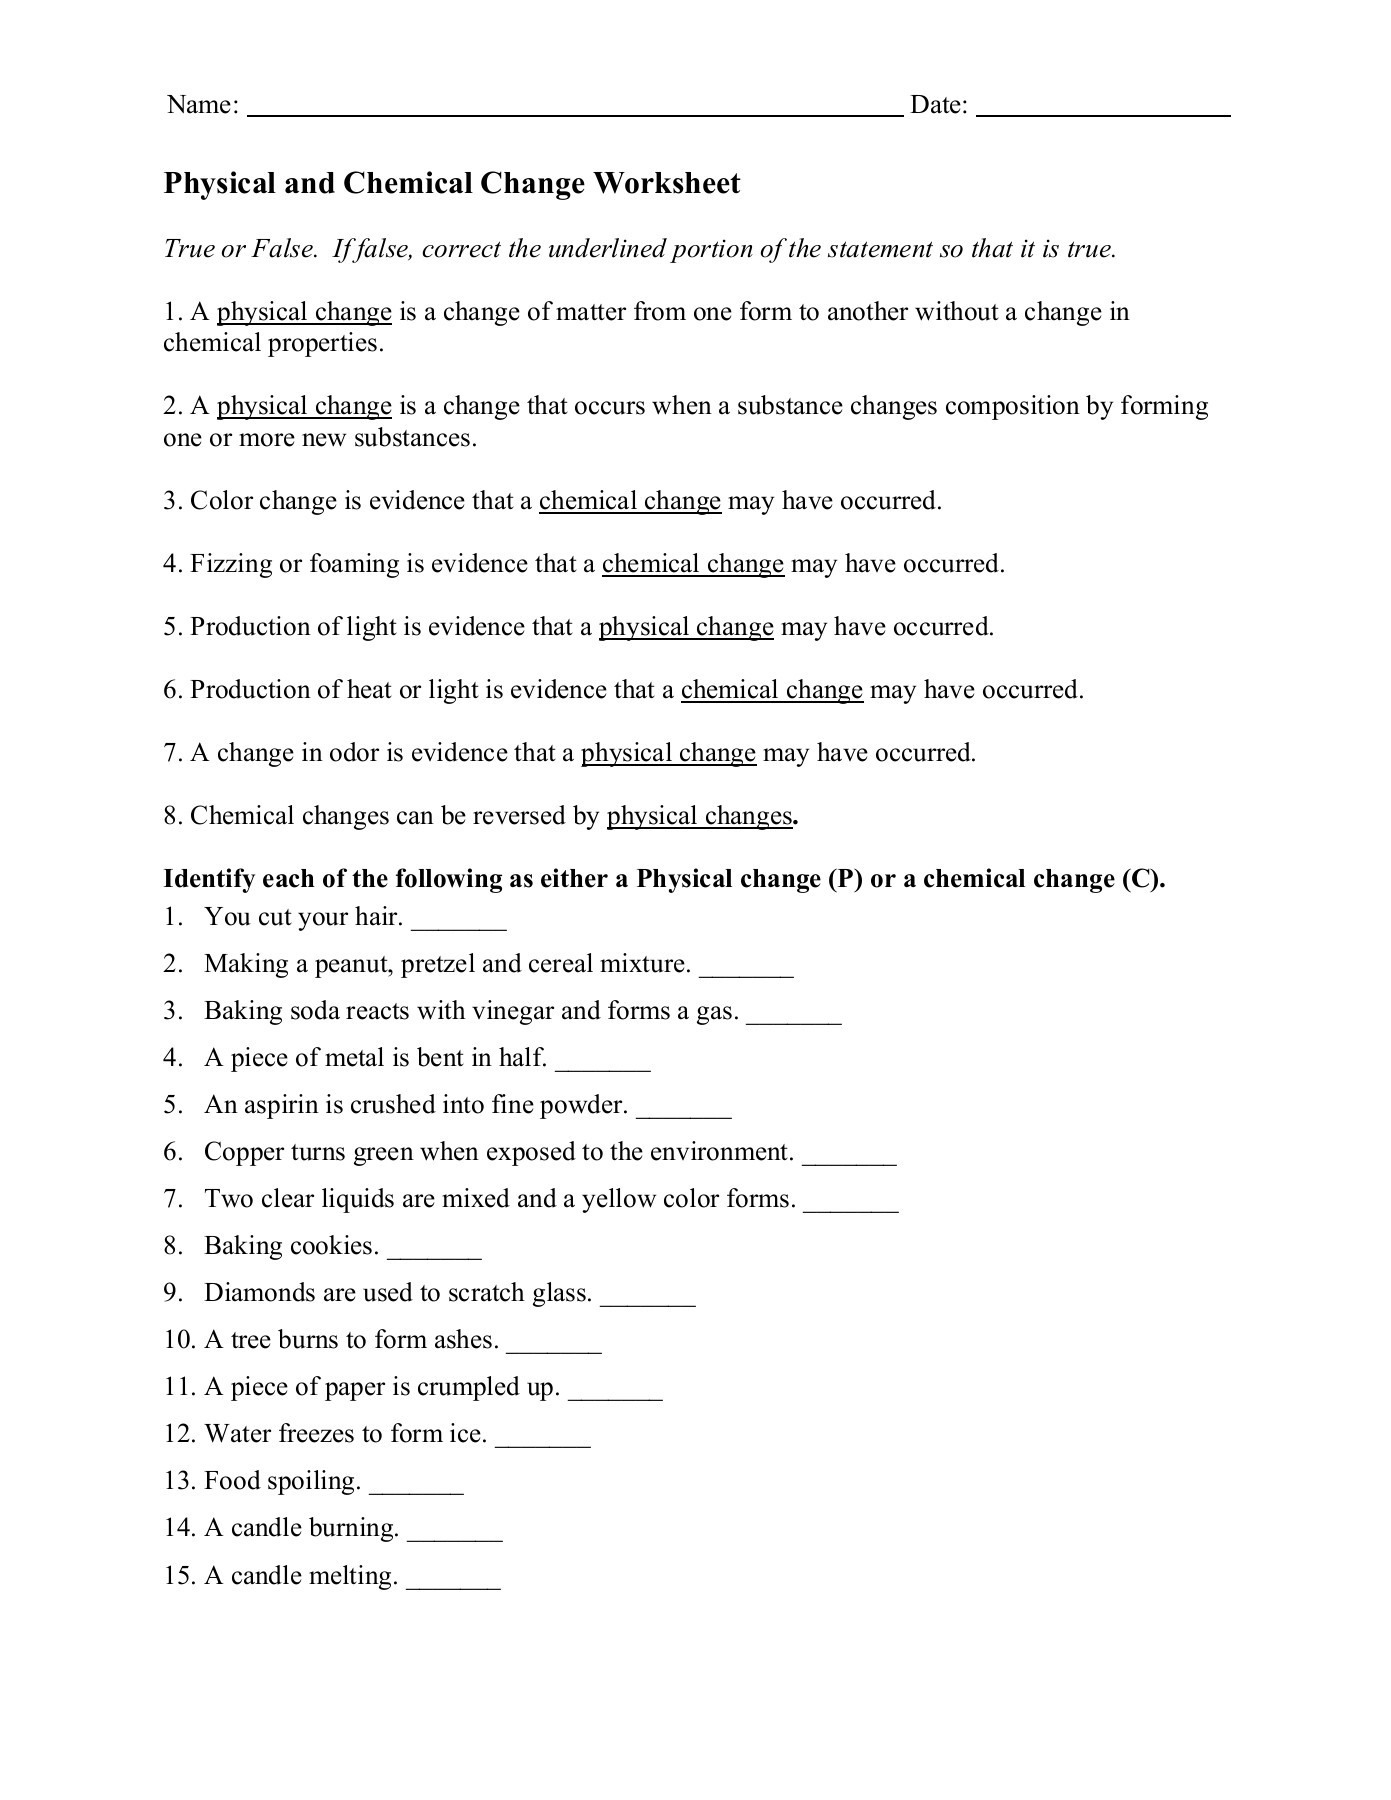 physical-chemical-changes-worksheet-db-excel